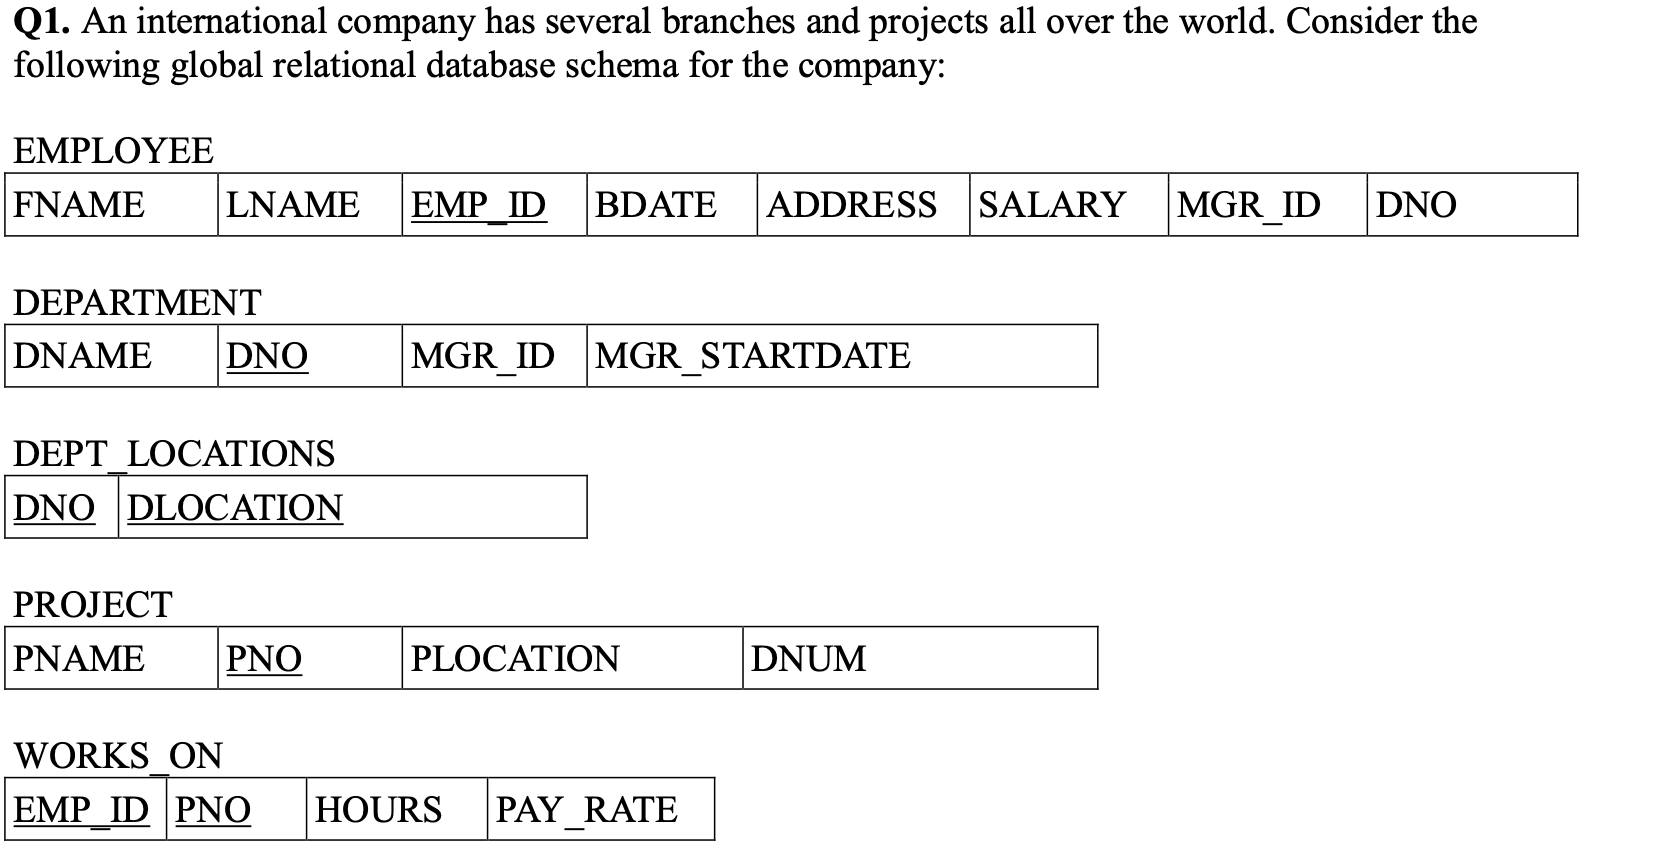 Q1. An international company has several branches and projects all over the world. Consider the
following global relational database schema for the company:
EMPLOYEE
SALARY
DNO
FNAME
EMP ID
MGR_ID
LNAME
BDATE
ADDRESS
DEPARTMENT
DNAME
DNO
MGR_ID MGR_STARTDATE
DEPT LOCATIONS
DNO DLOCATION
PROJECT
PLOCATION
DNUM
PNAME
PNO
WORKS ON
EMP ID PNO
HOURS
PAY_RATE
